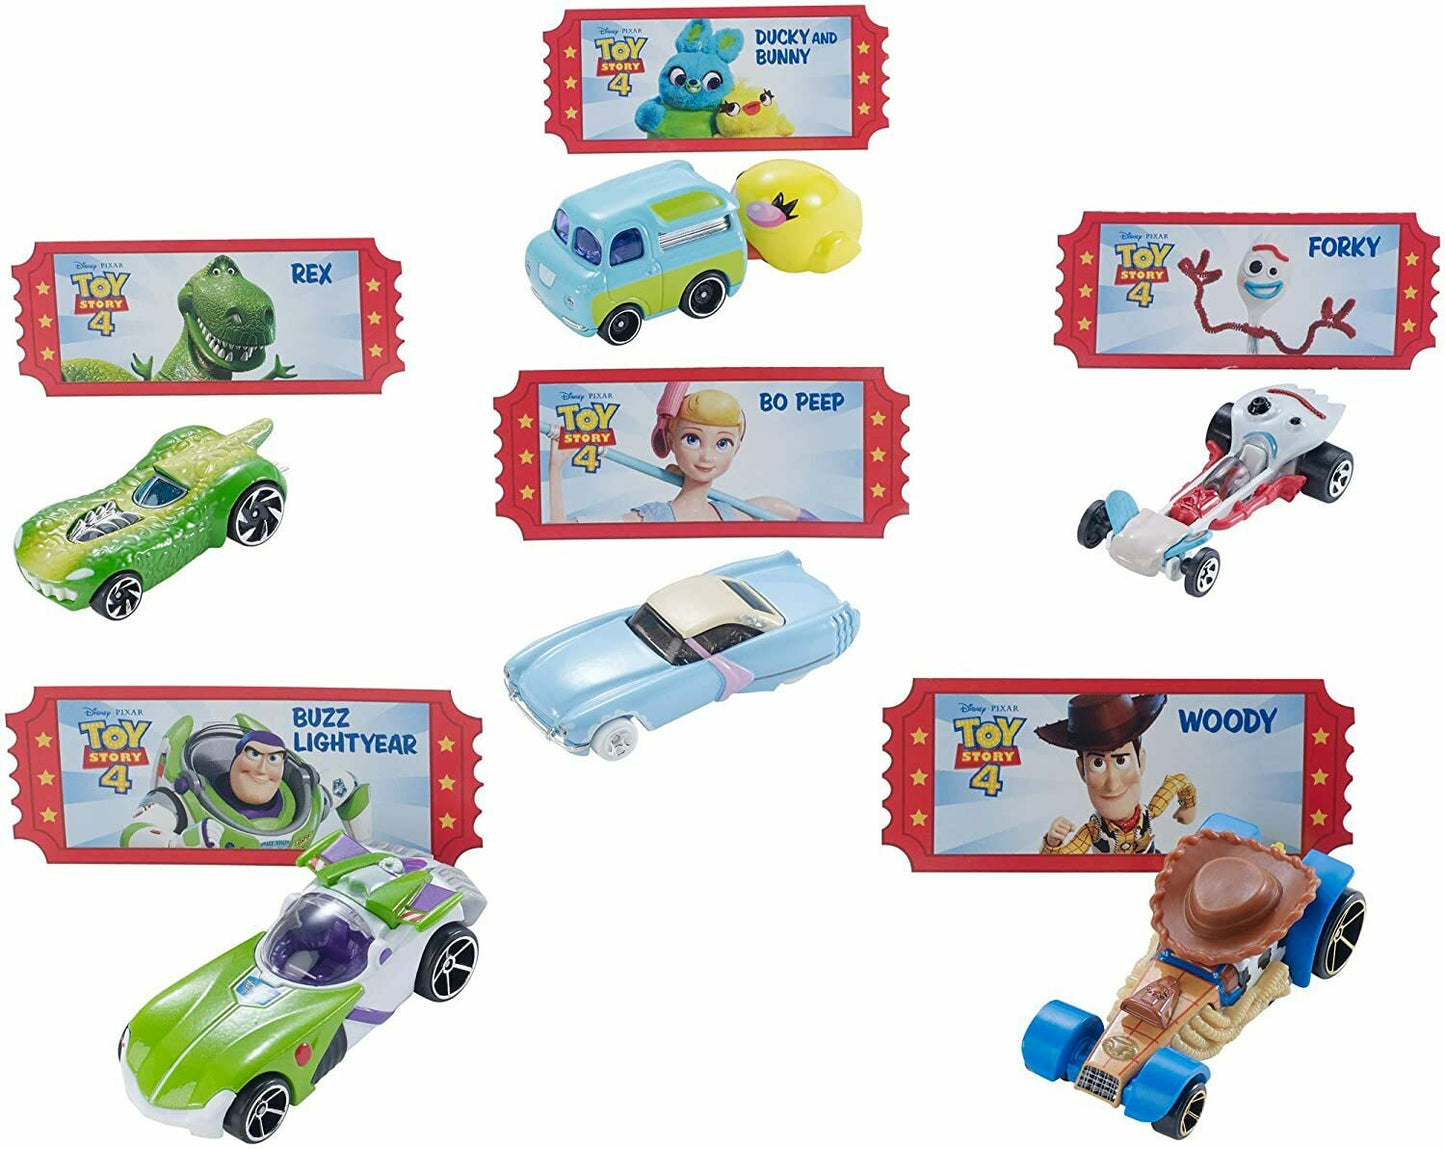 Hot Wheels 2021 - Character Cars / Toy Story / Boxed Set - 5 Vehicles